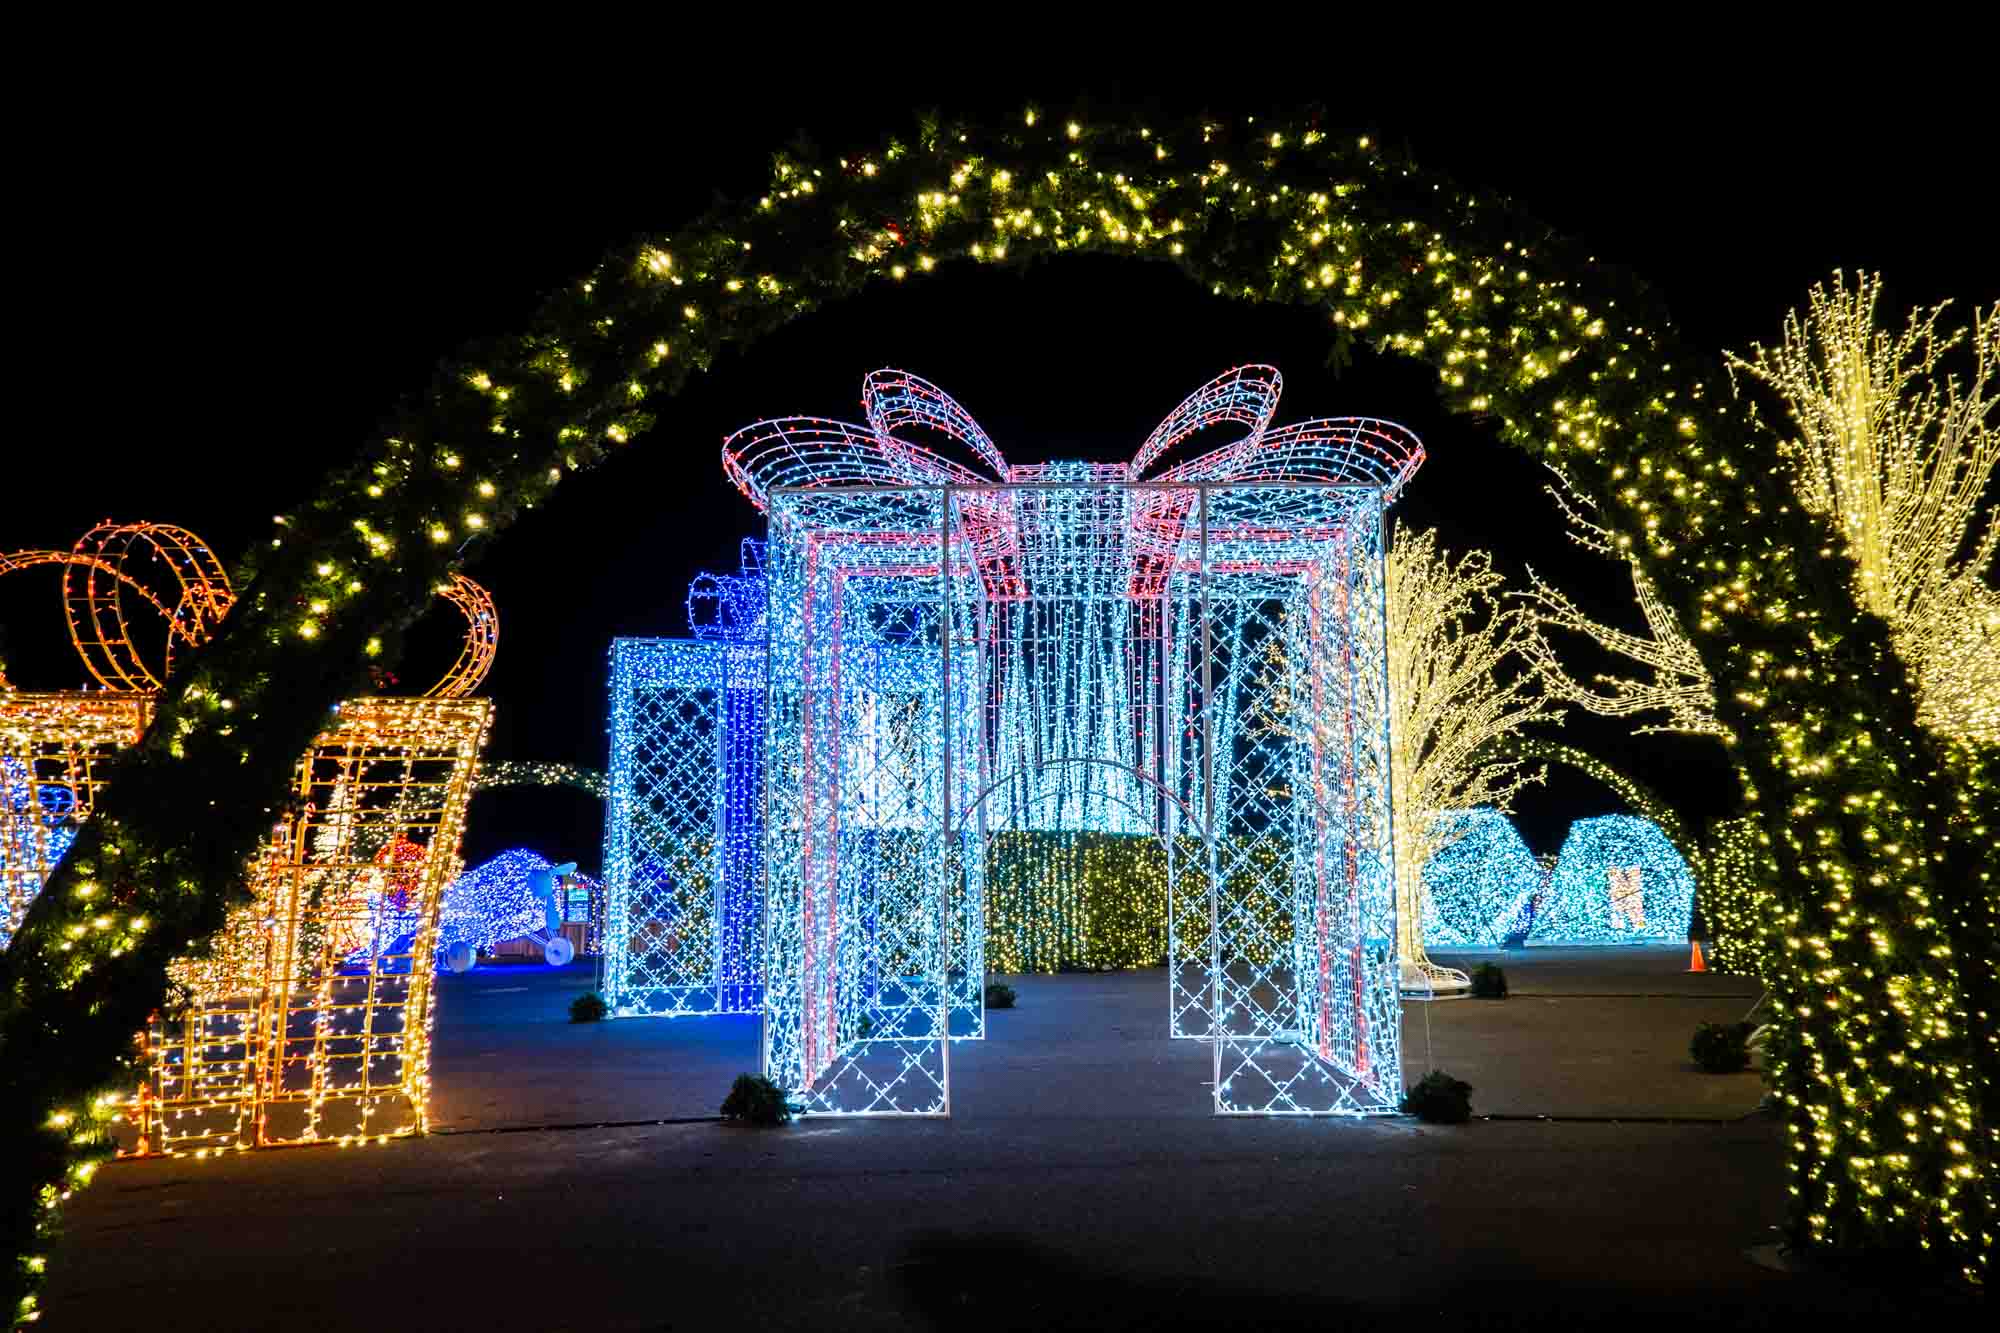 Giant, illuminated present packages at a light display.